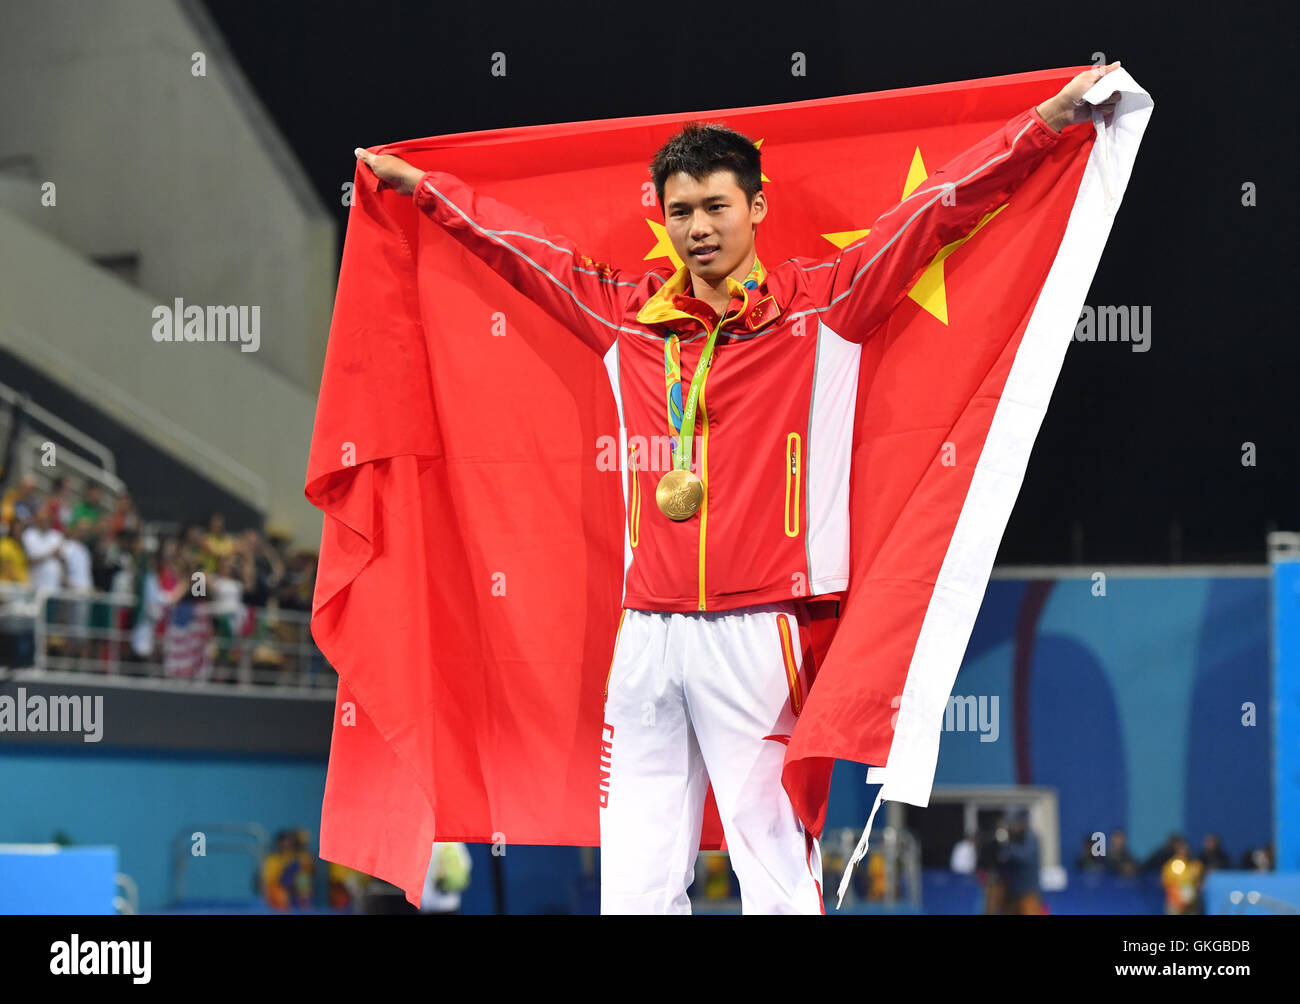 Rio de Janeiro, Brazil. 20th Aug, 2016. Gold medalist Chen Aisen of China celbrates during the medal ceremony of the Men's 10m Platform Final of the Diving event during the Rio 2016 Olympic Games at the Maria Lenk Aquatics Centre in Rio de Janeiro, Brazil, 20 August 2016. Photo: Felix Kaestle/dpa/Alamy Live News Stock Photo